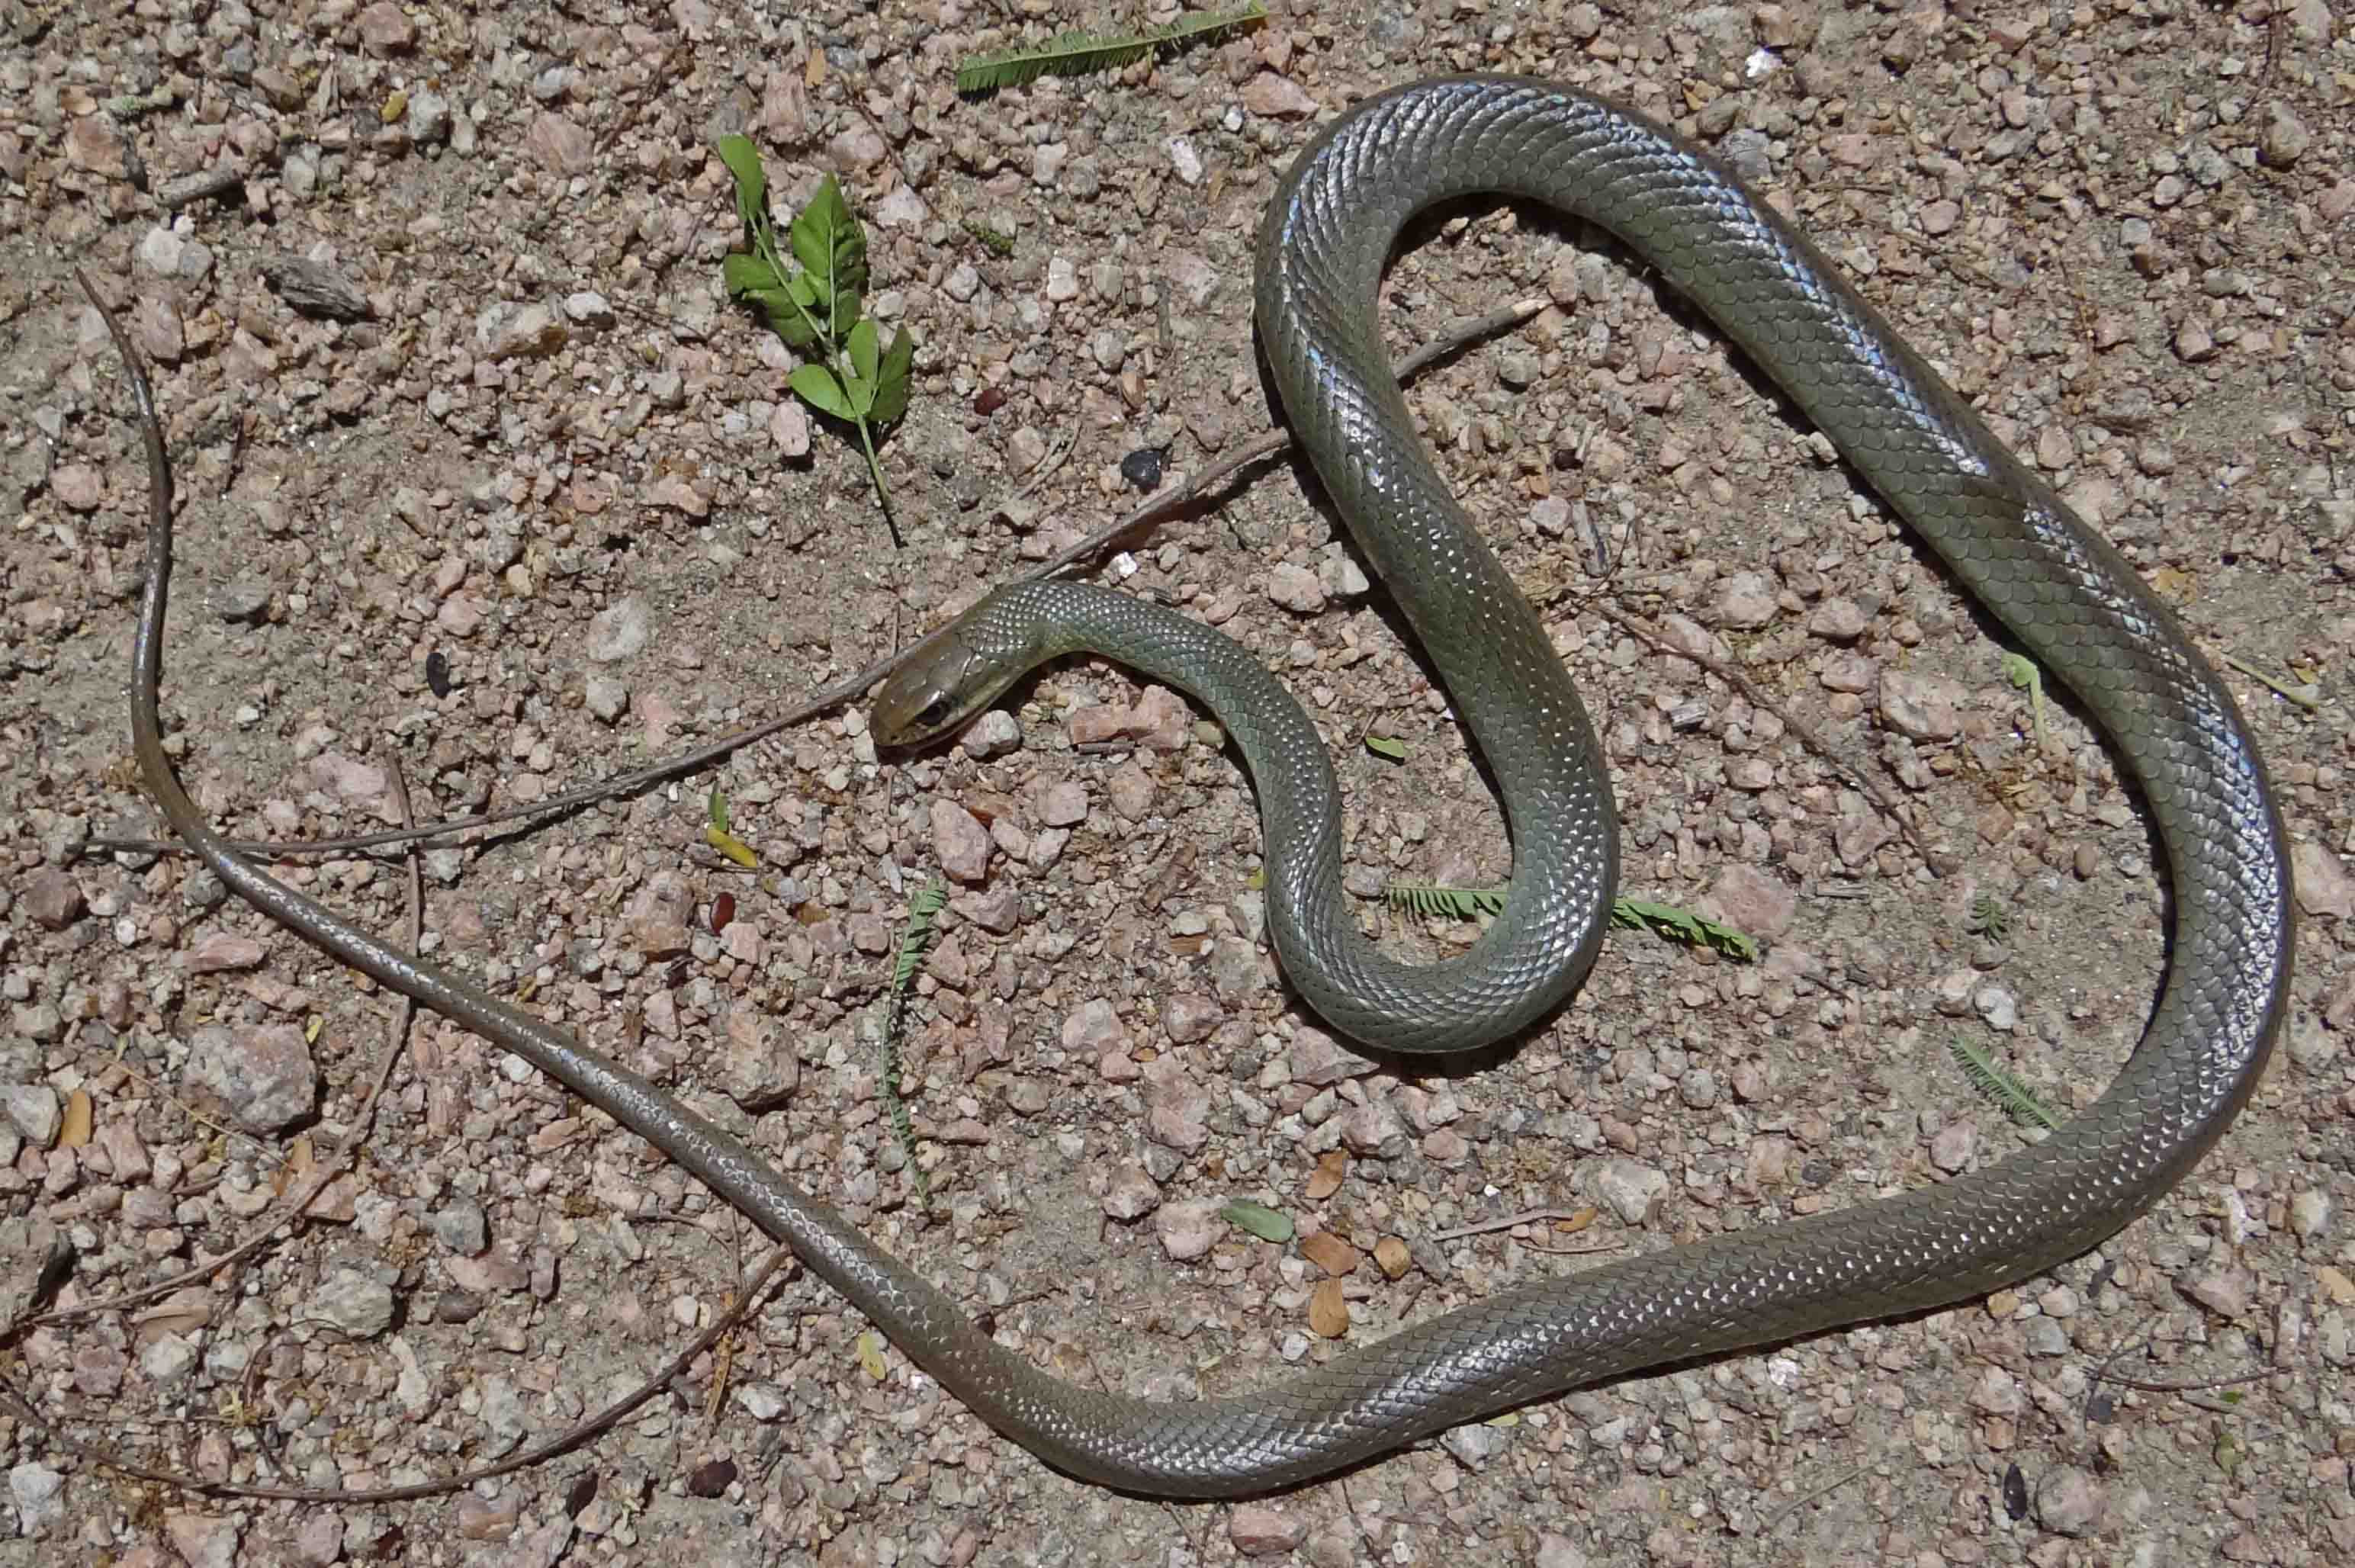 And their appearance really does depend thamnophis sirtalis annectens (texas garter snake): Reptiles And Amphibians Of The Lower Rio Grande Valley